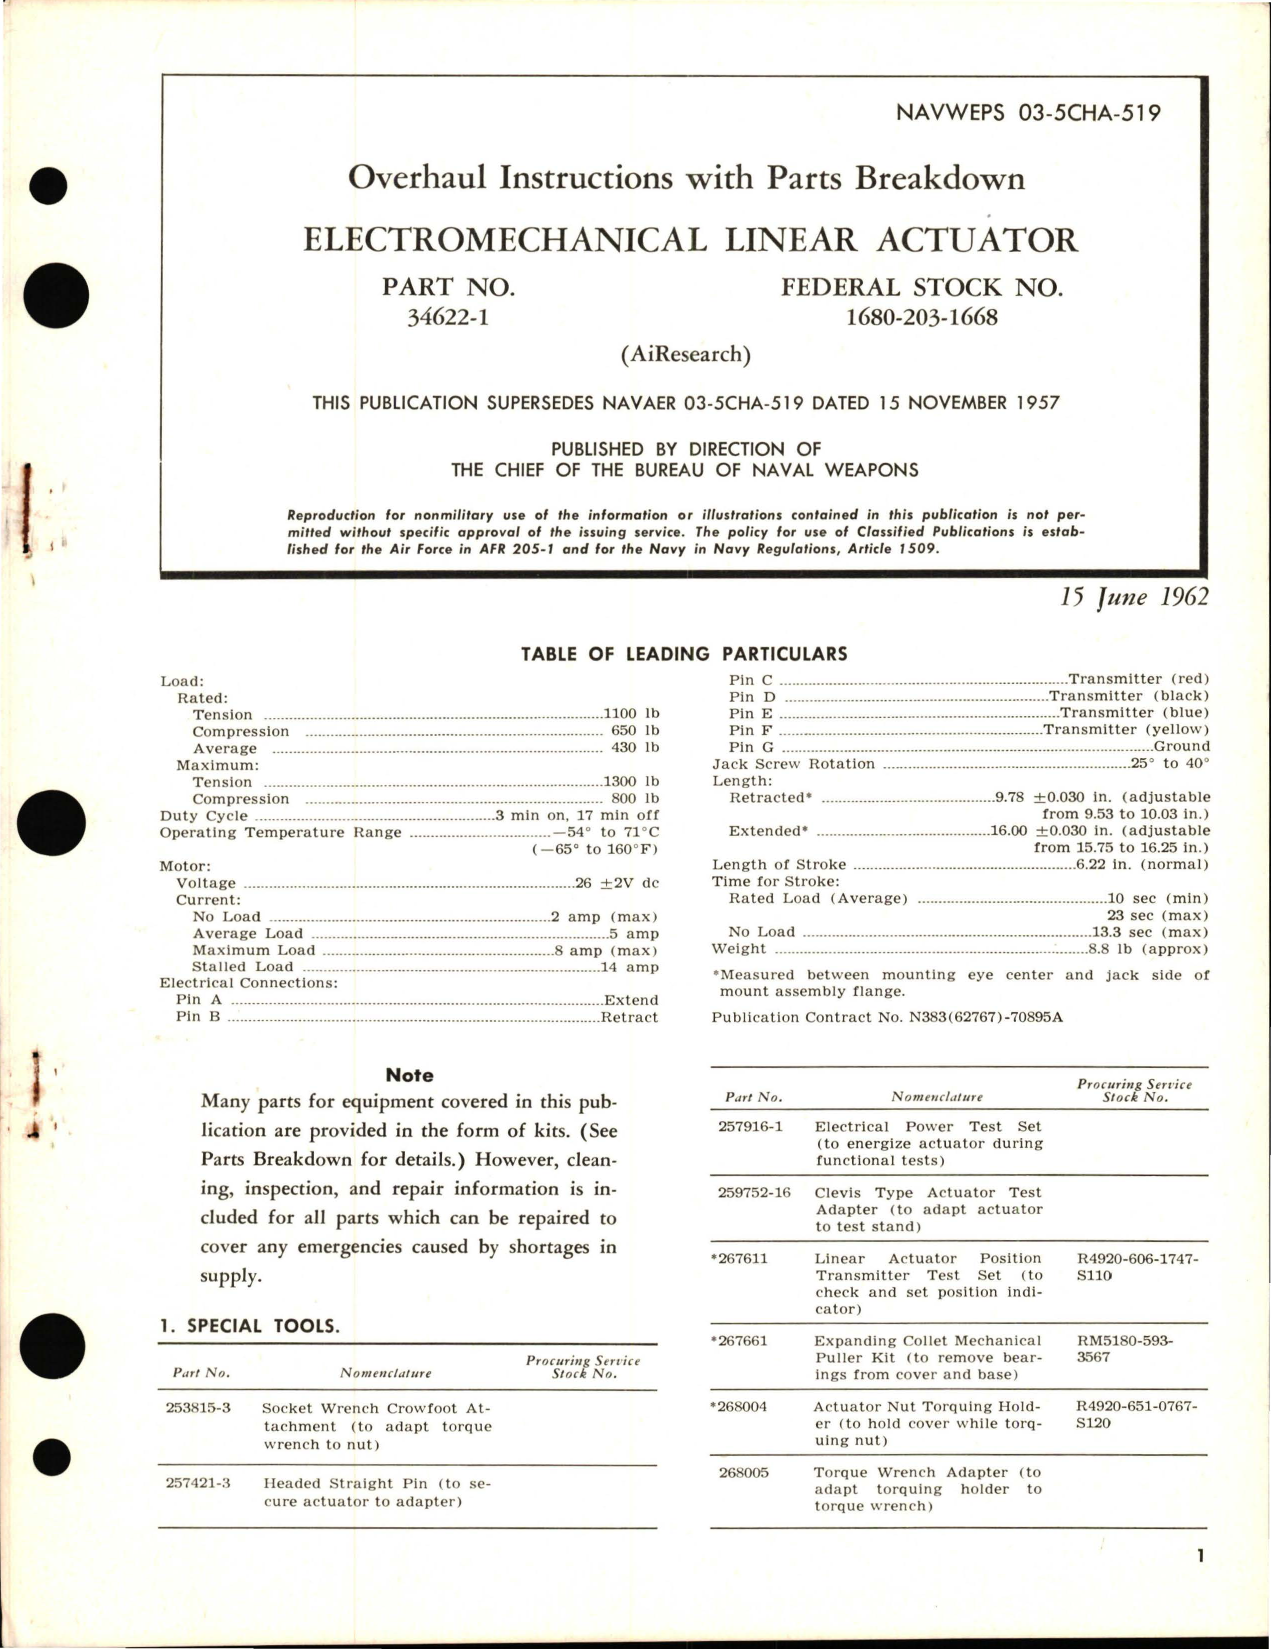 Sample page 1 from AirCorps Library document: Overhaul Instructions with Parts Breakdown for Electromechanical Linear Actuator - Part 34622-1